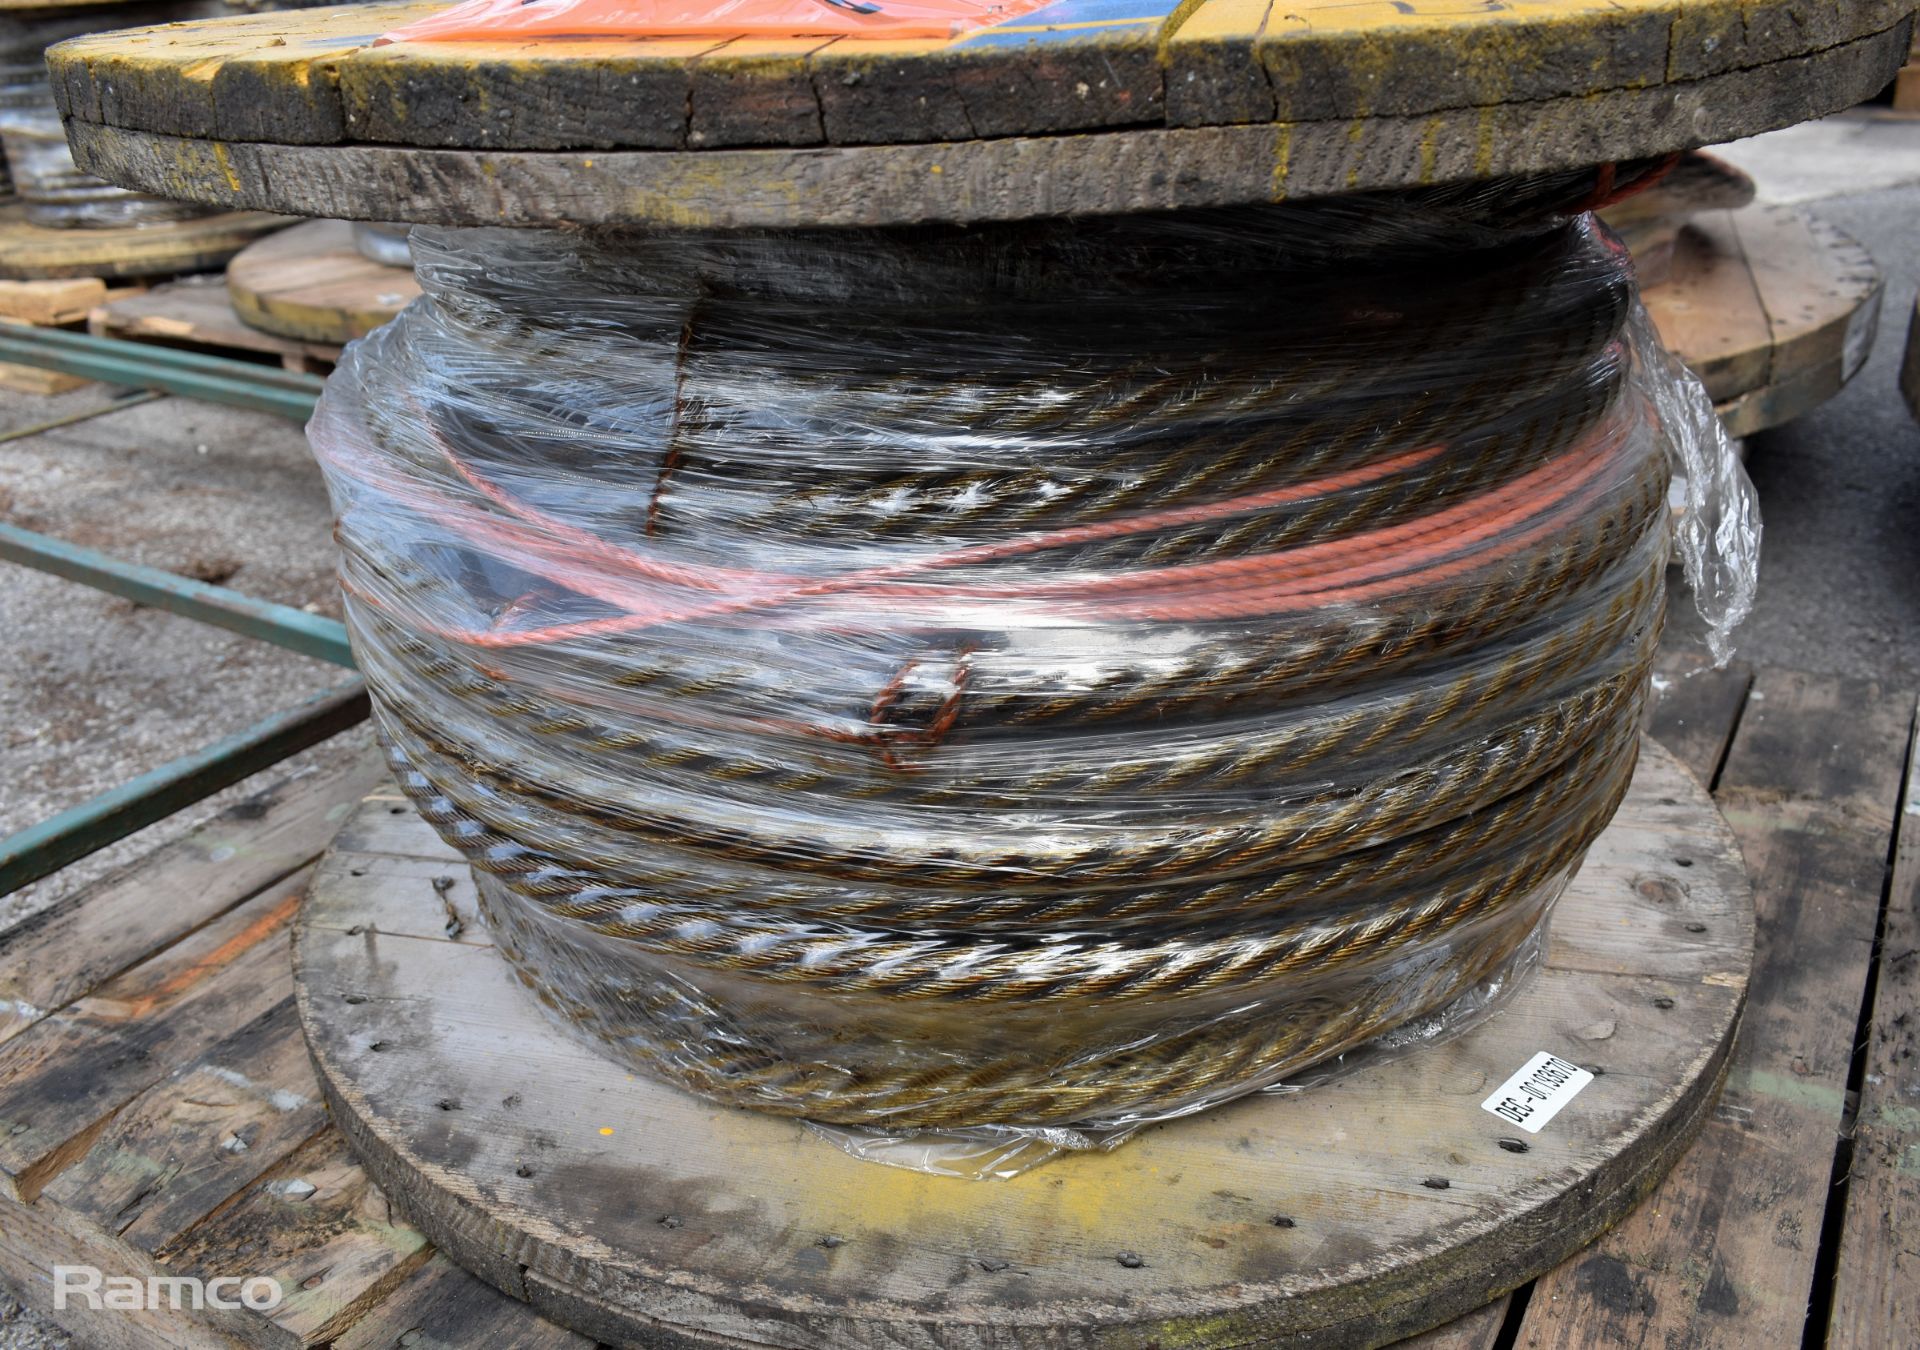 24mm 6 strand galvanised steel wire rope reel - approx weight: 300kg - Image 2 of 3